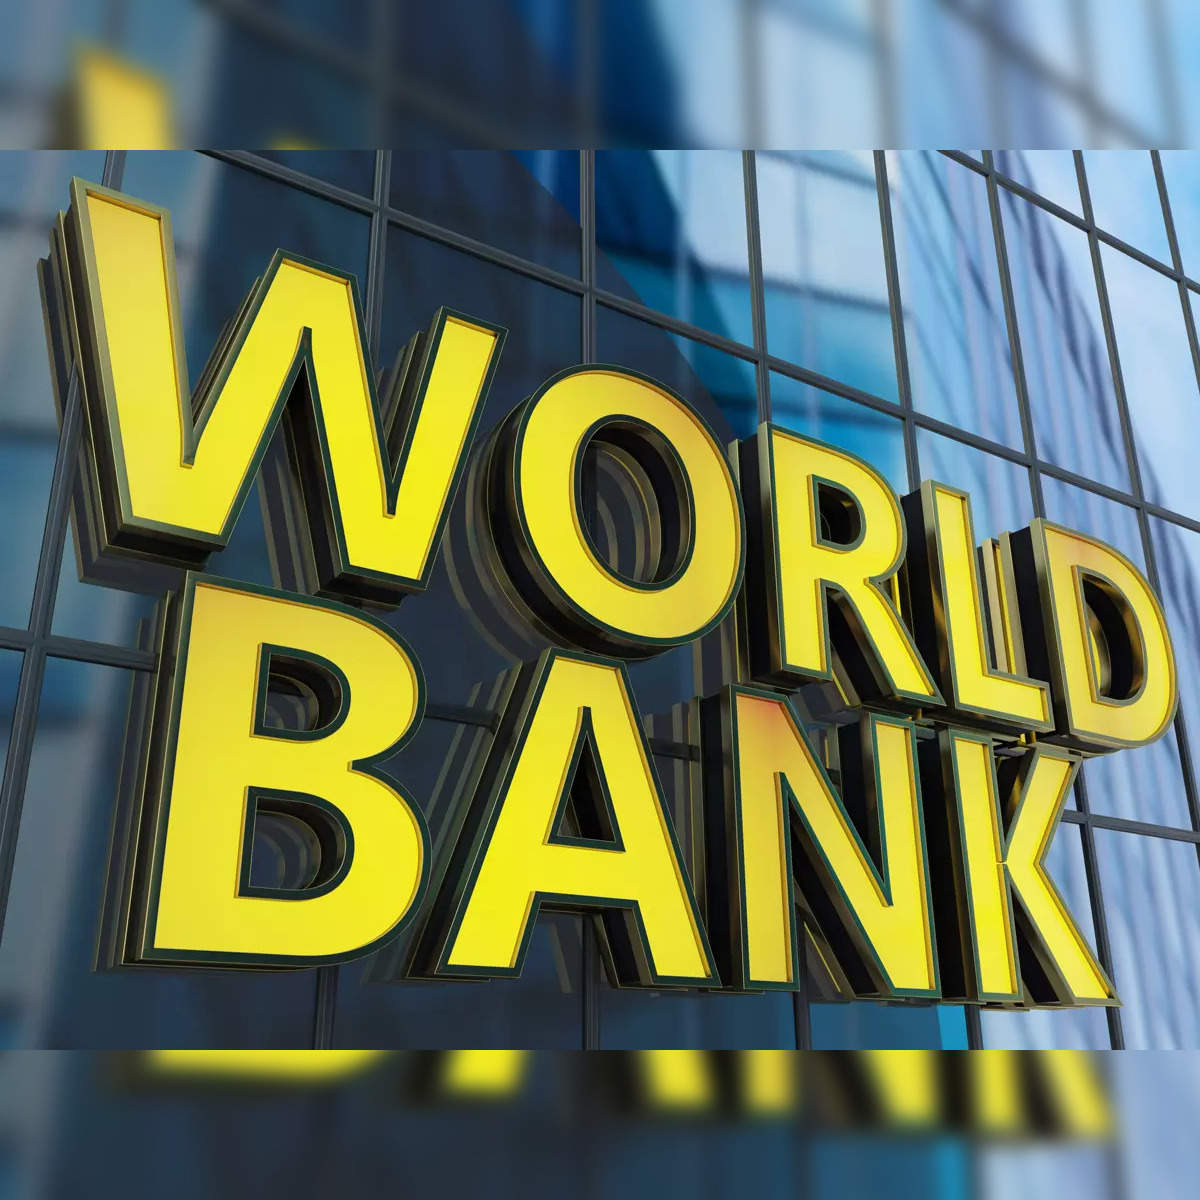 world bank: With Ajay Banga at the helm, likely road ahead for World Bank- India ties - The Economic Times